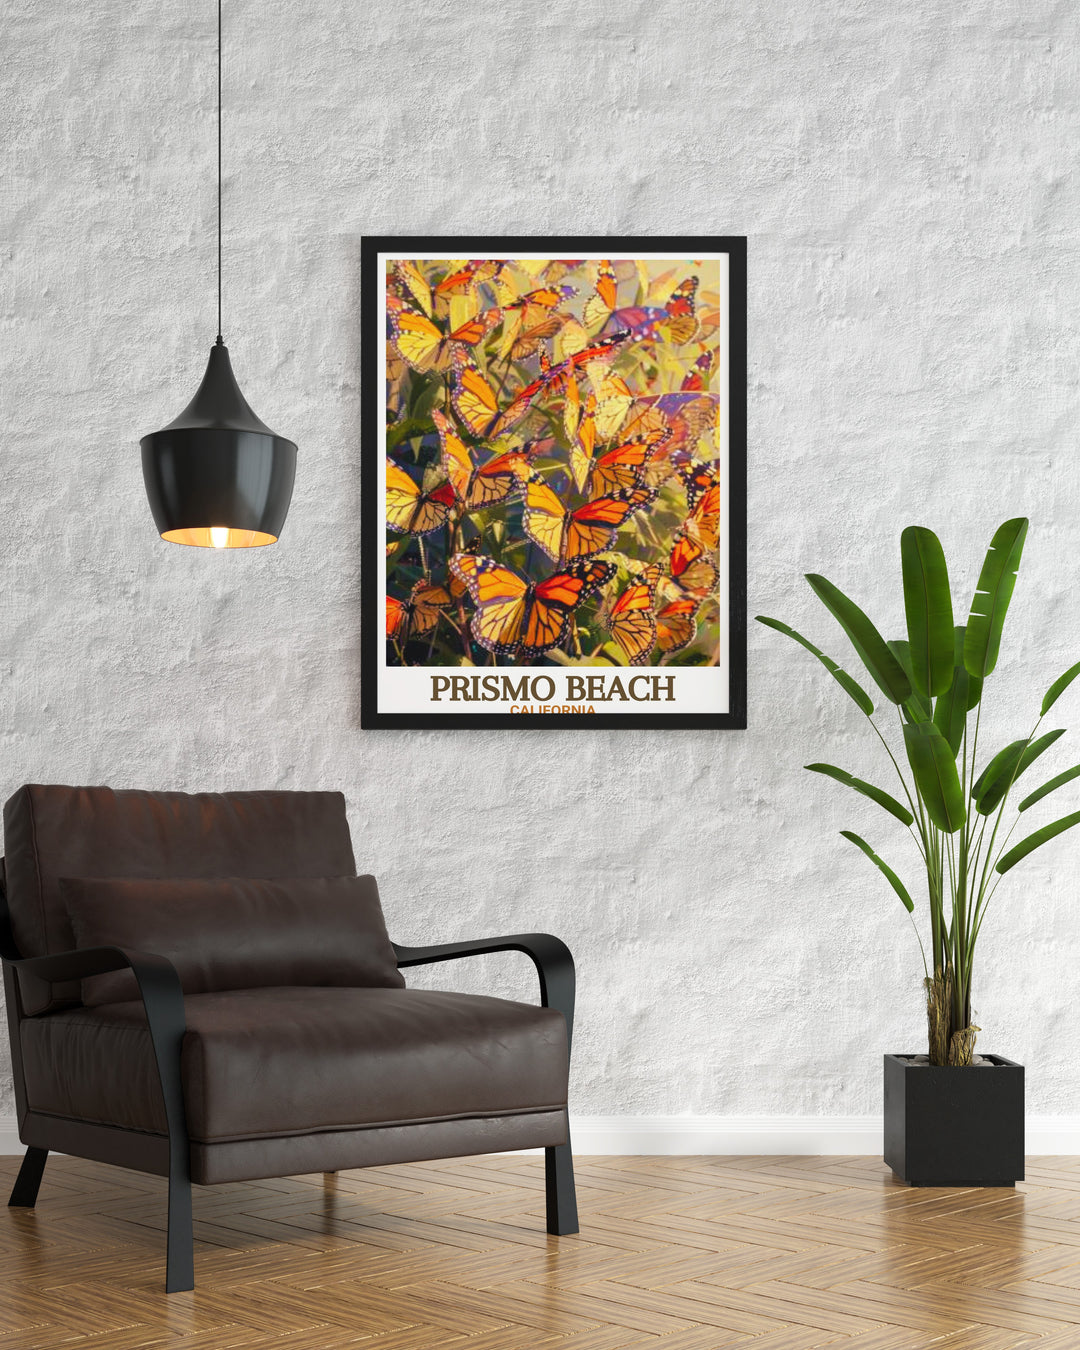 Pismo Beach Decor featuring vibrant California landscapes ideal for home or office decor Monarch Butterfly Grove modern decor pieces provide a serene and elegant touch